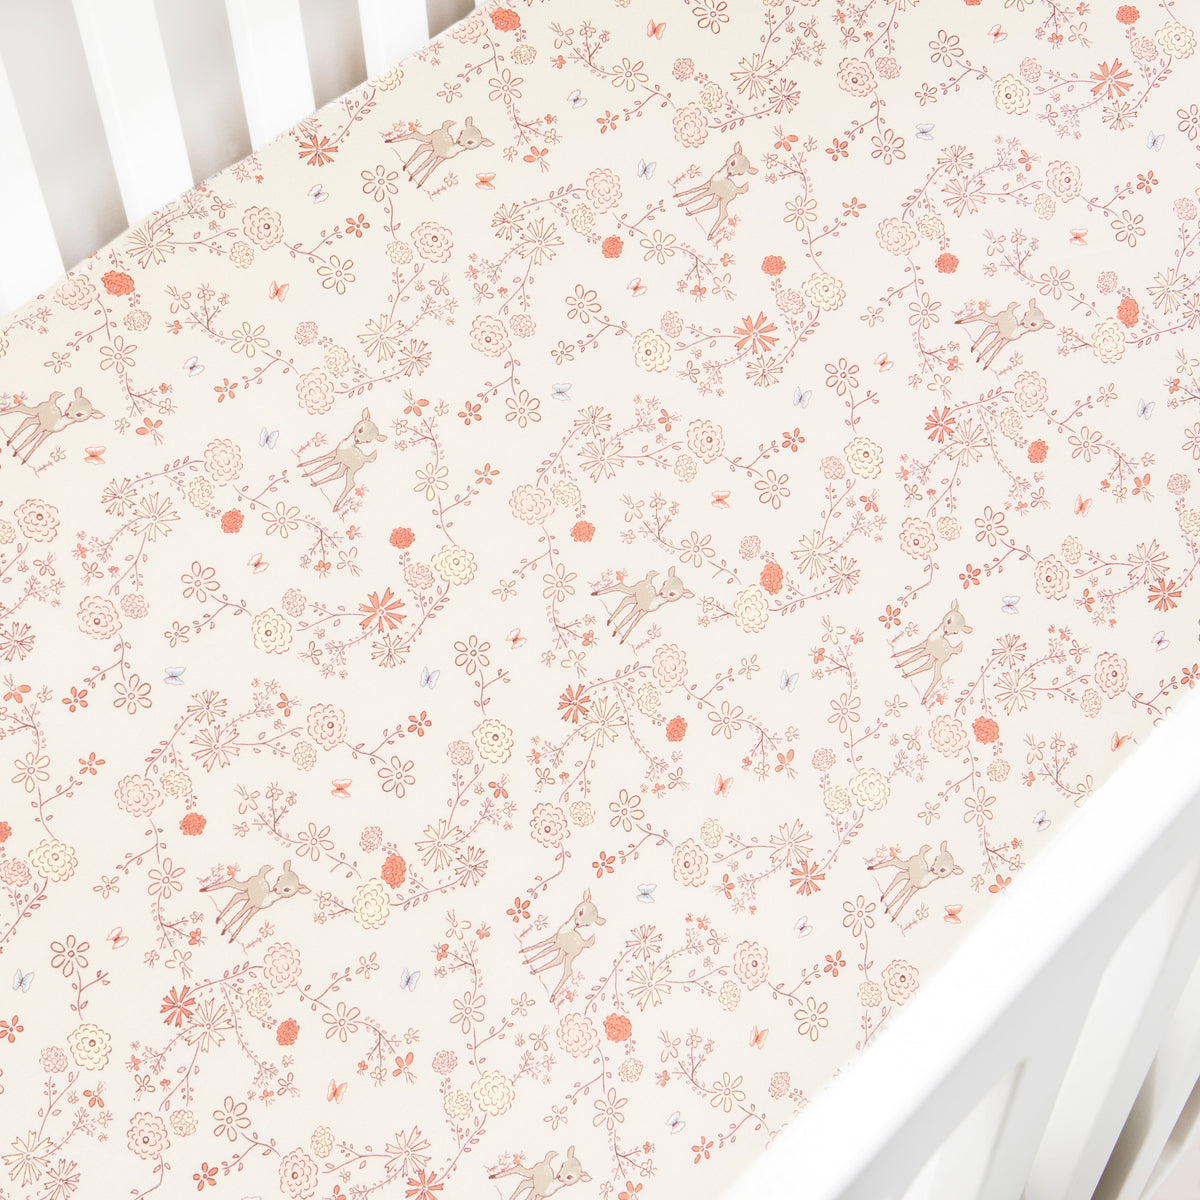 Crib Sheet in "Into The Woodlands" print in the color ivory featured in a crib